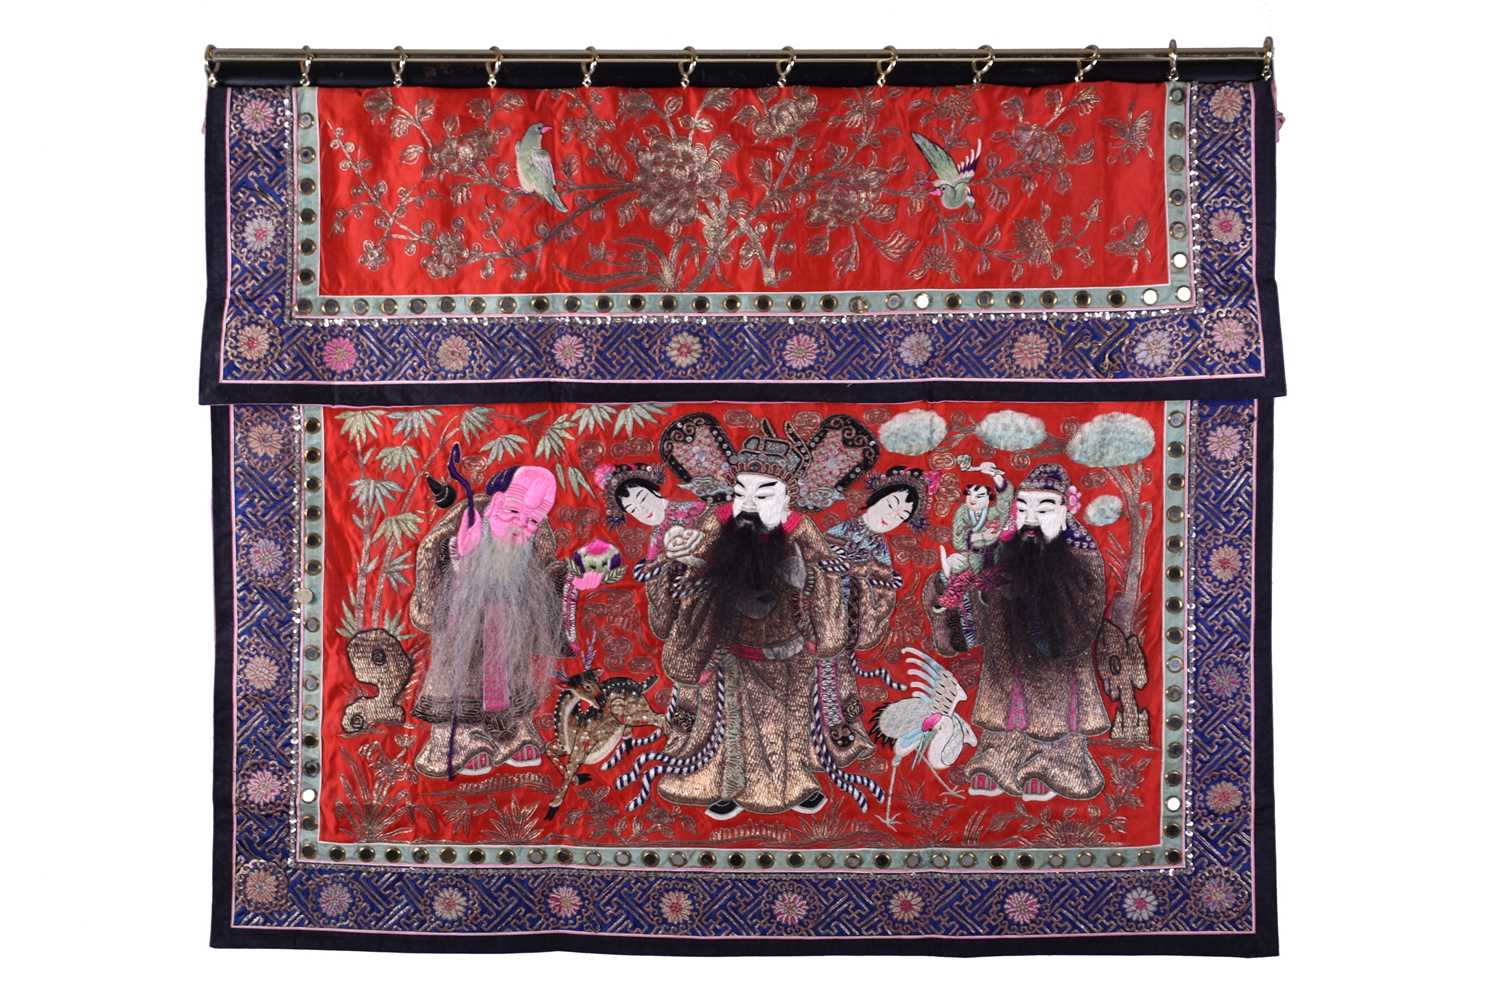 Lot 113 - A South East Asian embroidered silk altar cloth, 20th century